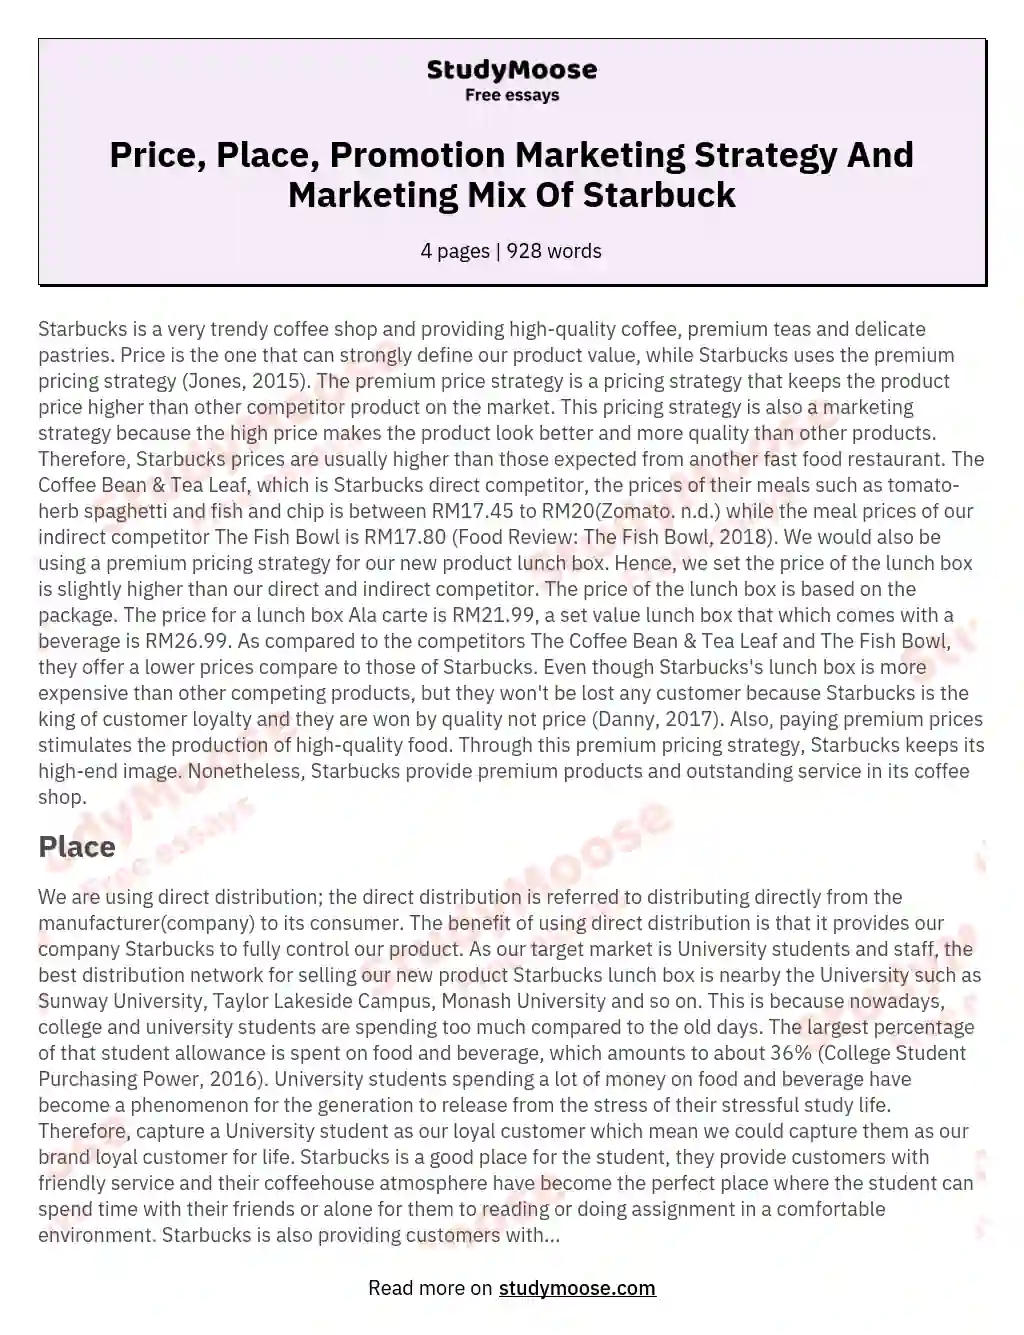 Price, Place, Promotion Marketing Strategy And Marketing Mix Of Starbuck